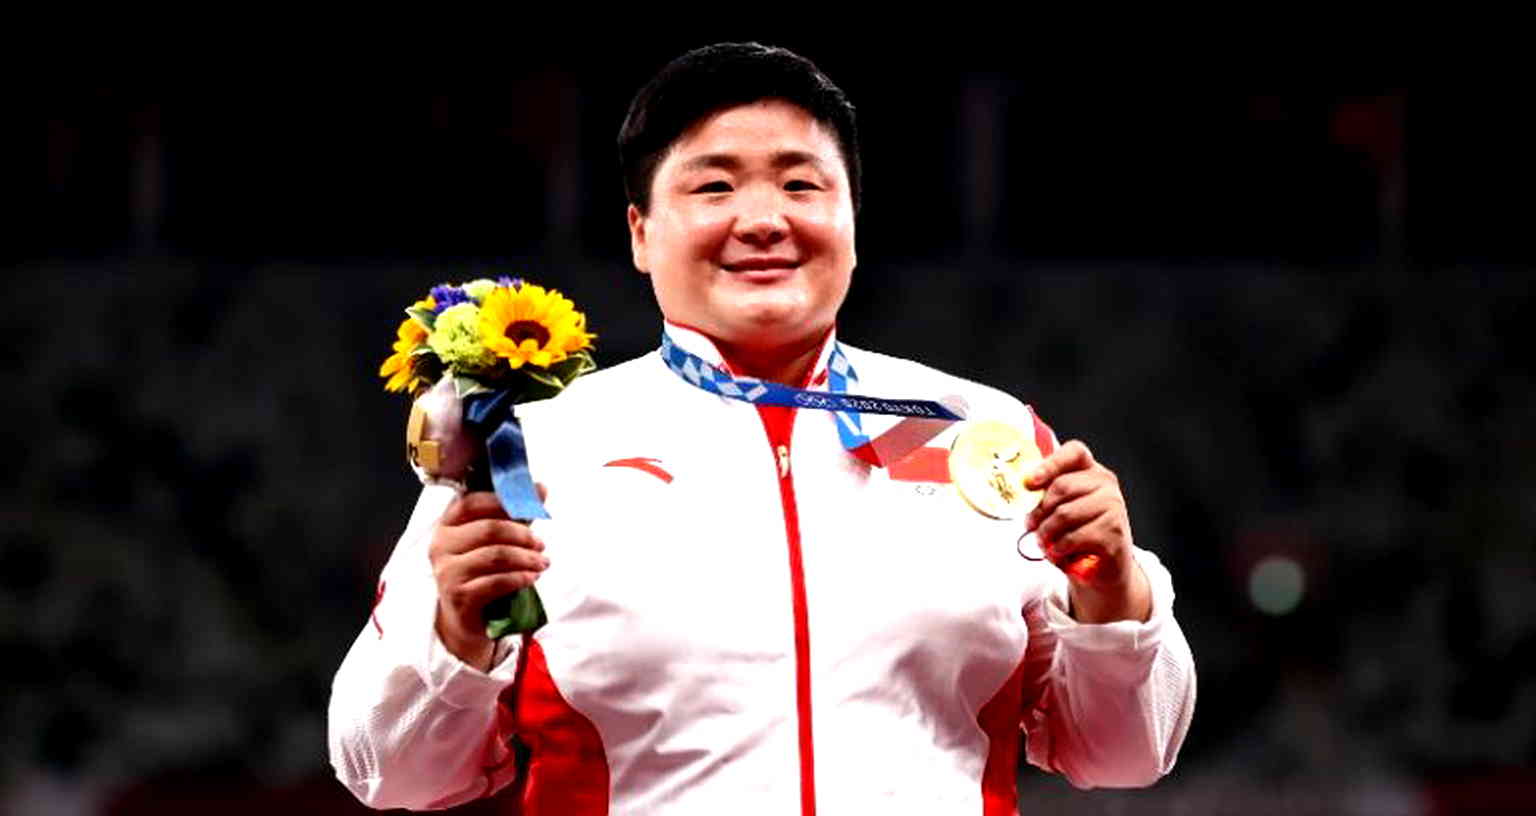 Chinese gold medalist Gong Lijiao makes historic win, faces sexist comments from reporters